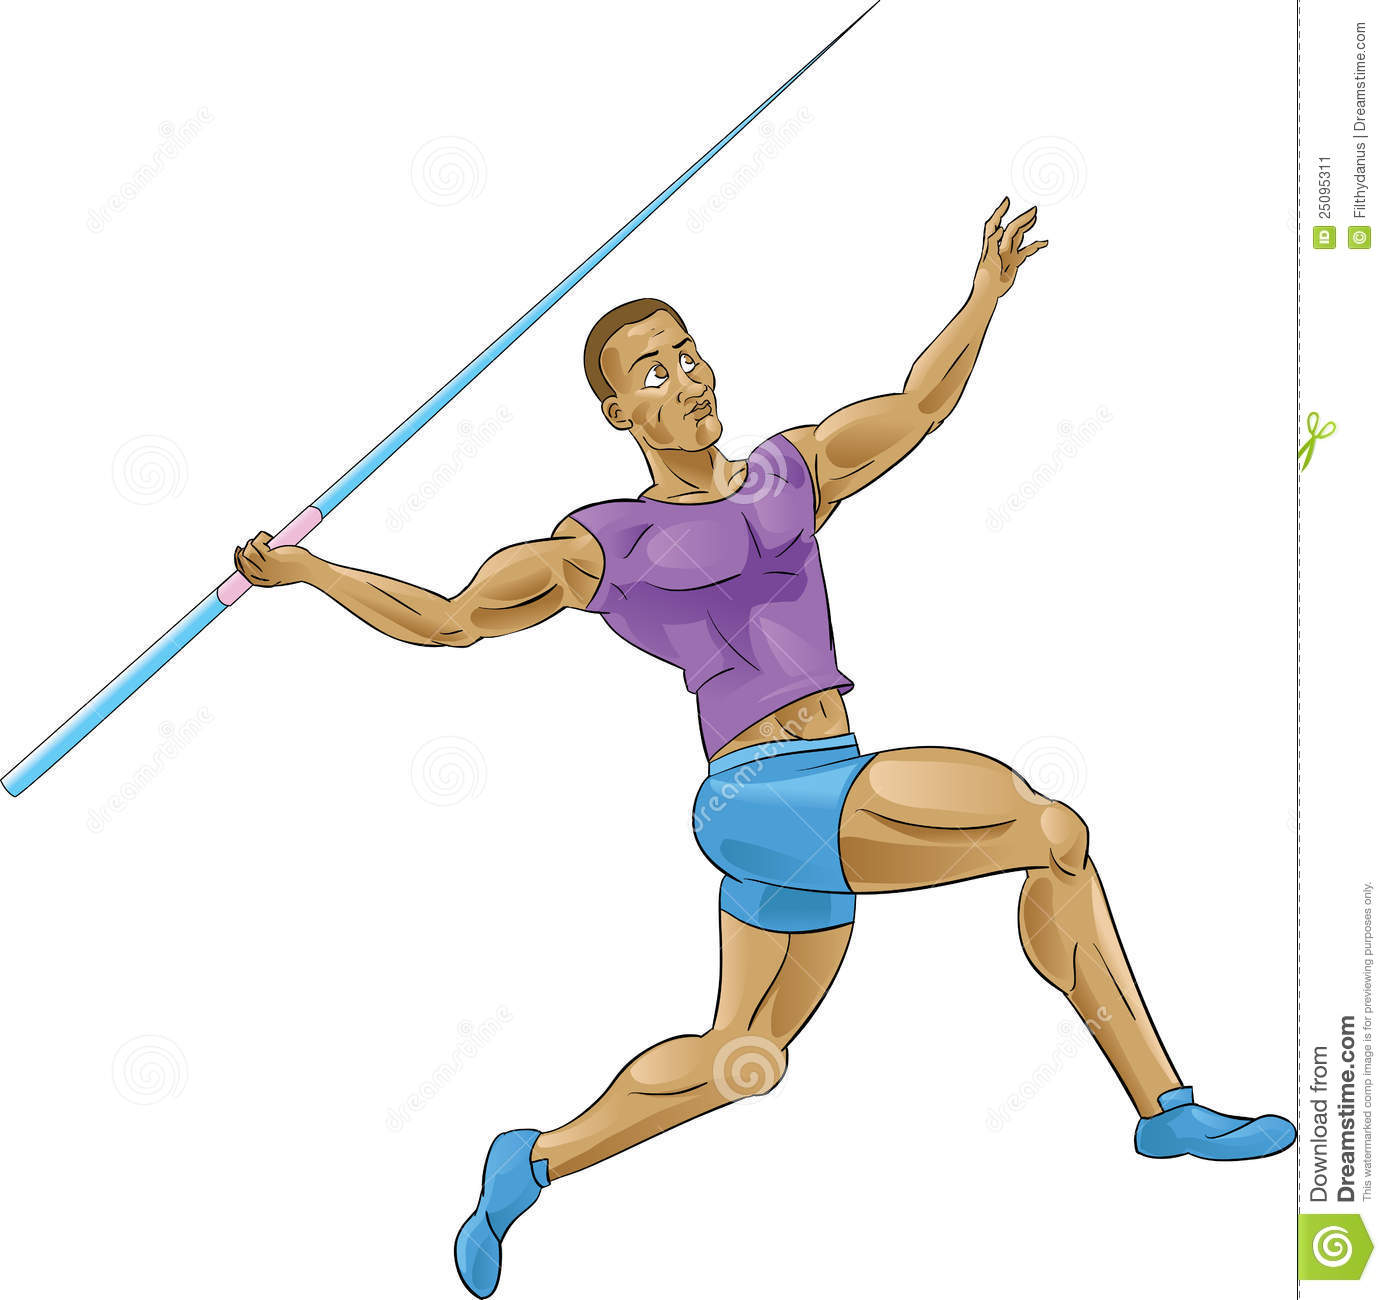 Olympics Spear Throwing Javelin Stock Image   Image  25095311